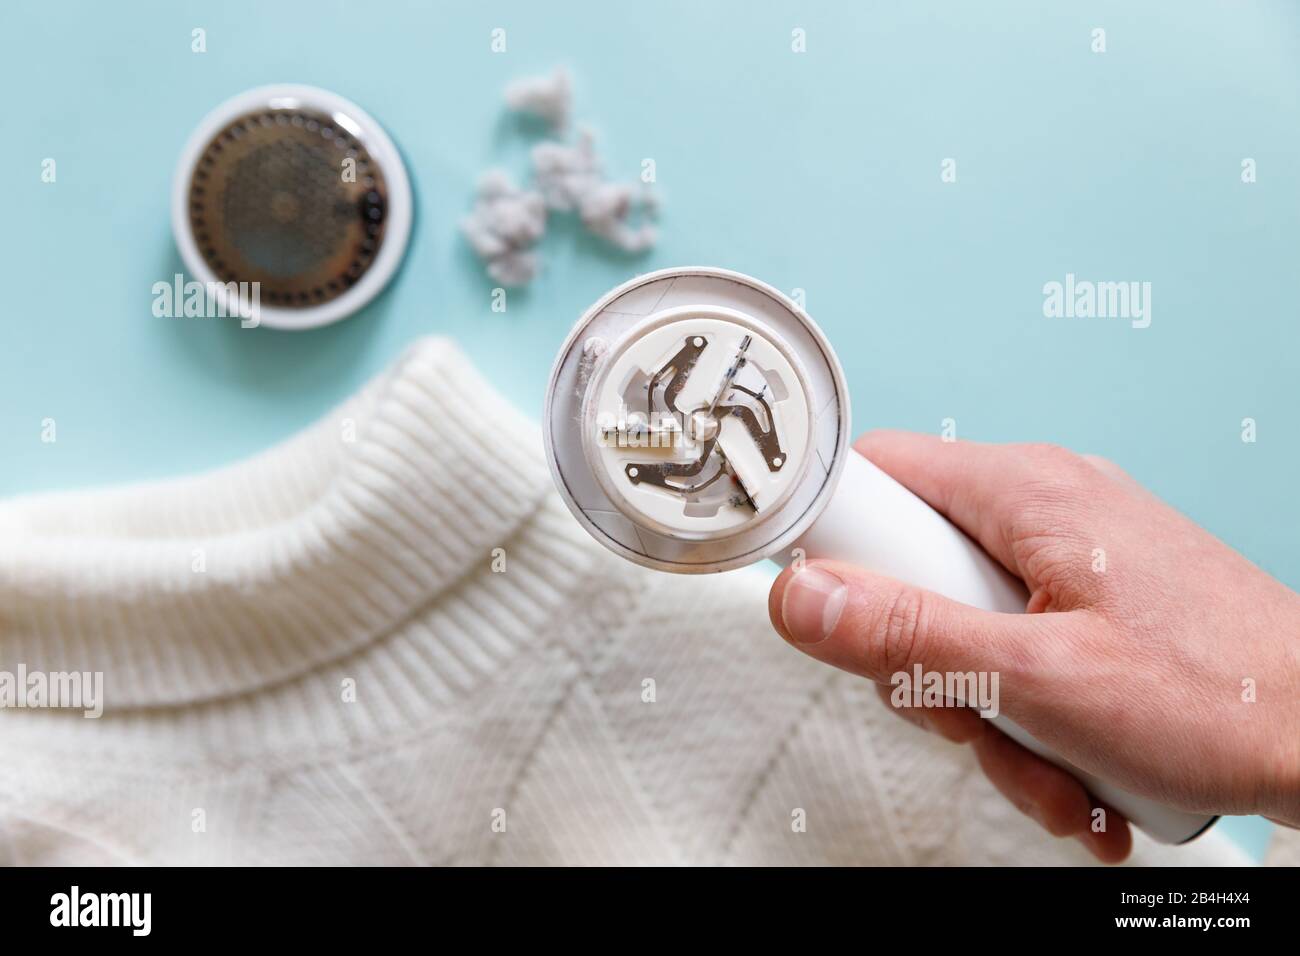 Man's hand holding a lint remover from a white acrylic or wool sweater. Electric device after cleaning and collected fluff/lint, light wooden backgrou Stock Photo